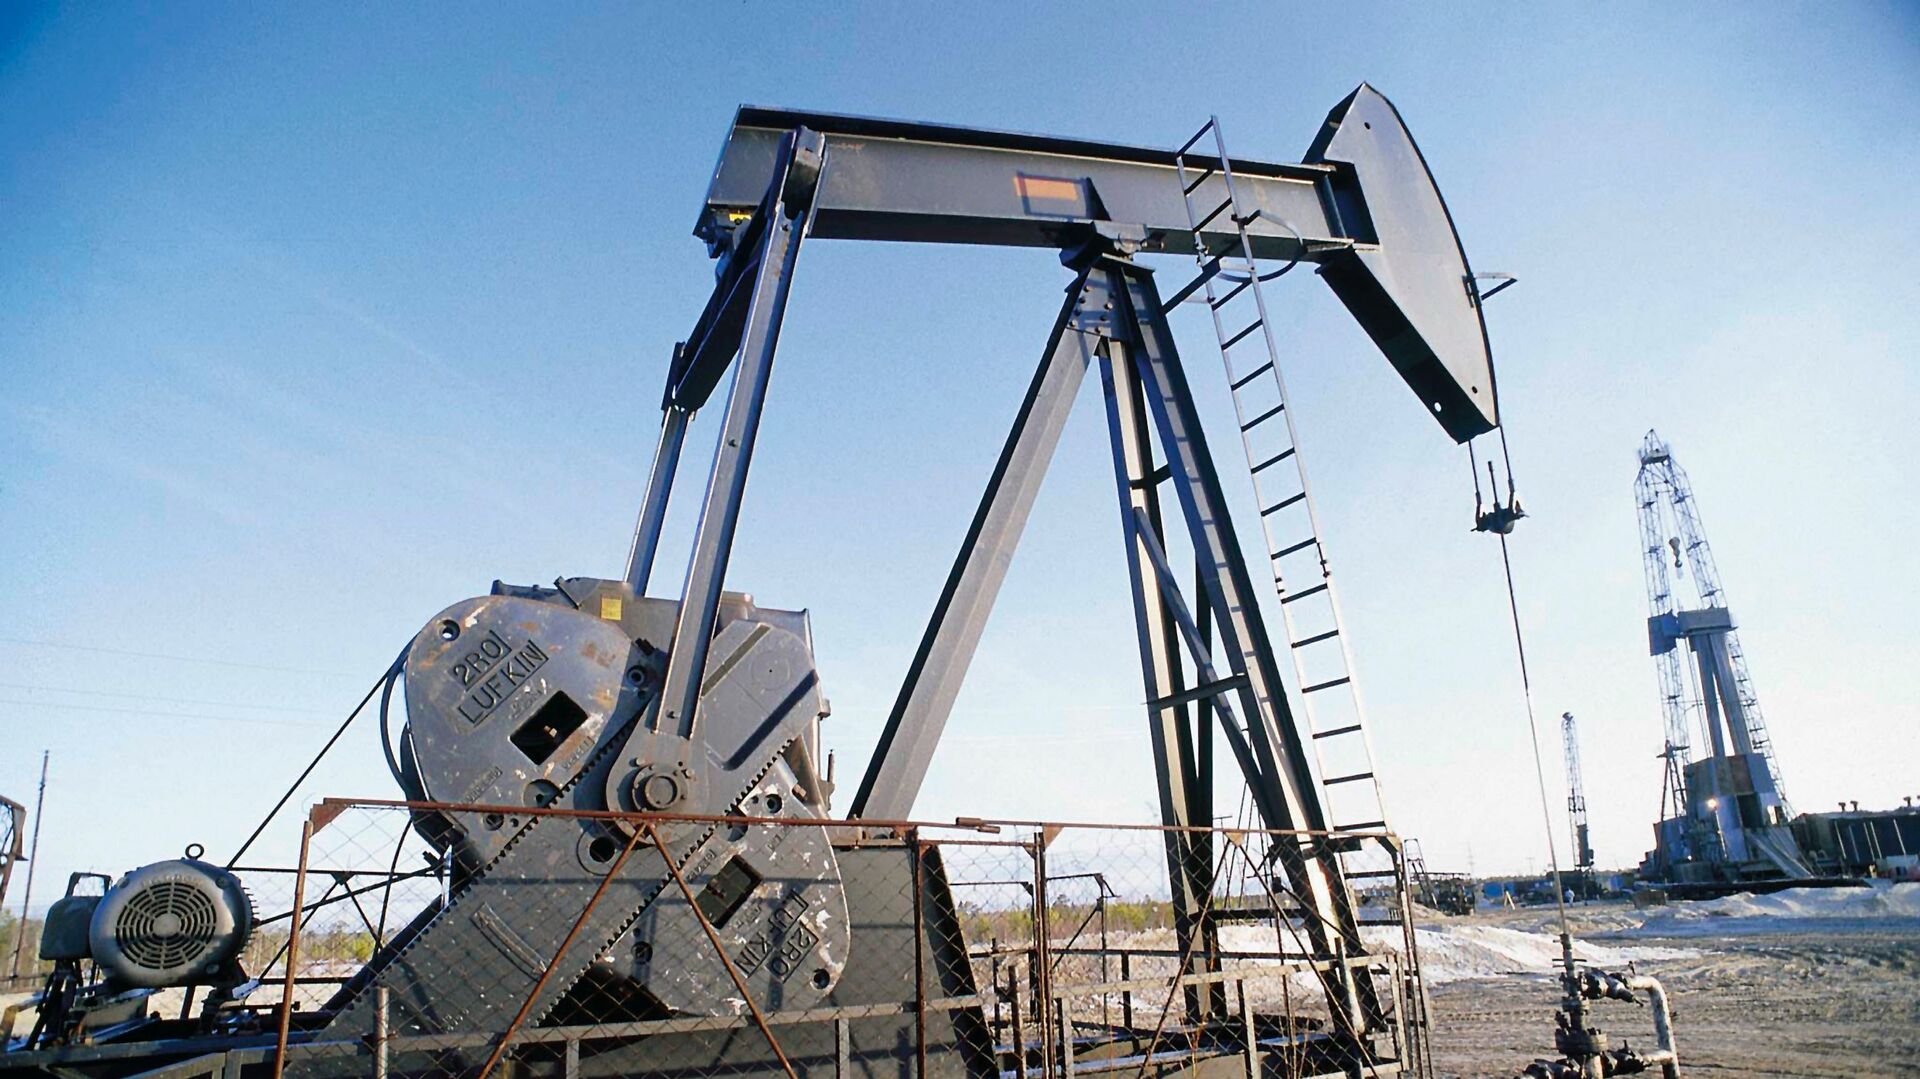 The prices of West Texas Intermediate (WTI), the US oil benchmark, and Brent crude, the global oil benchmark, hit record lows not seen since April 2009 on Tuesday. - Sputnik Азербайджан, 1920, 04.04.2023